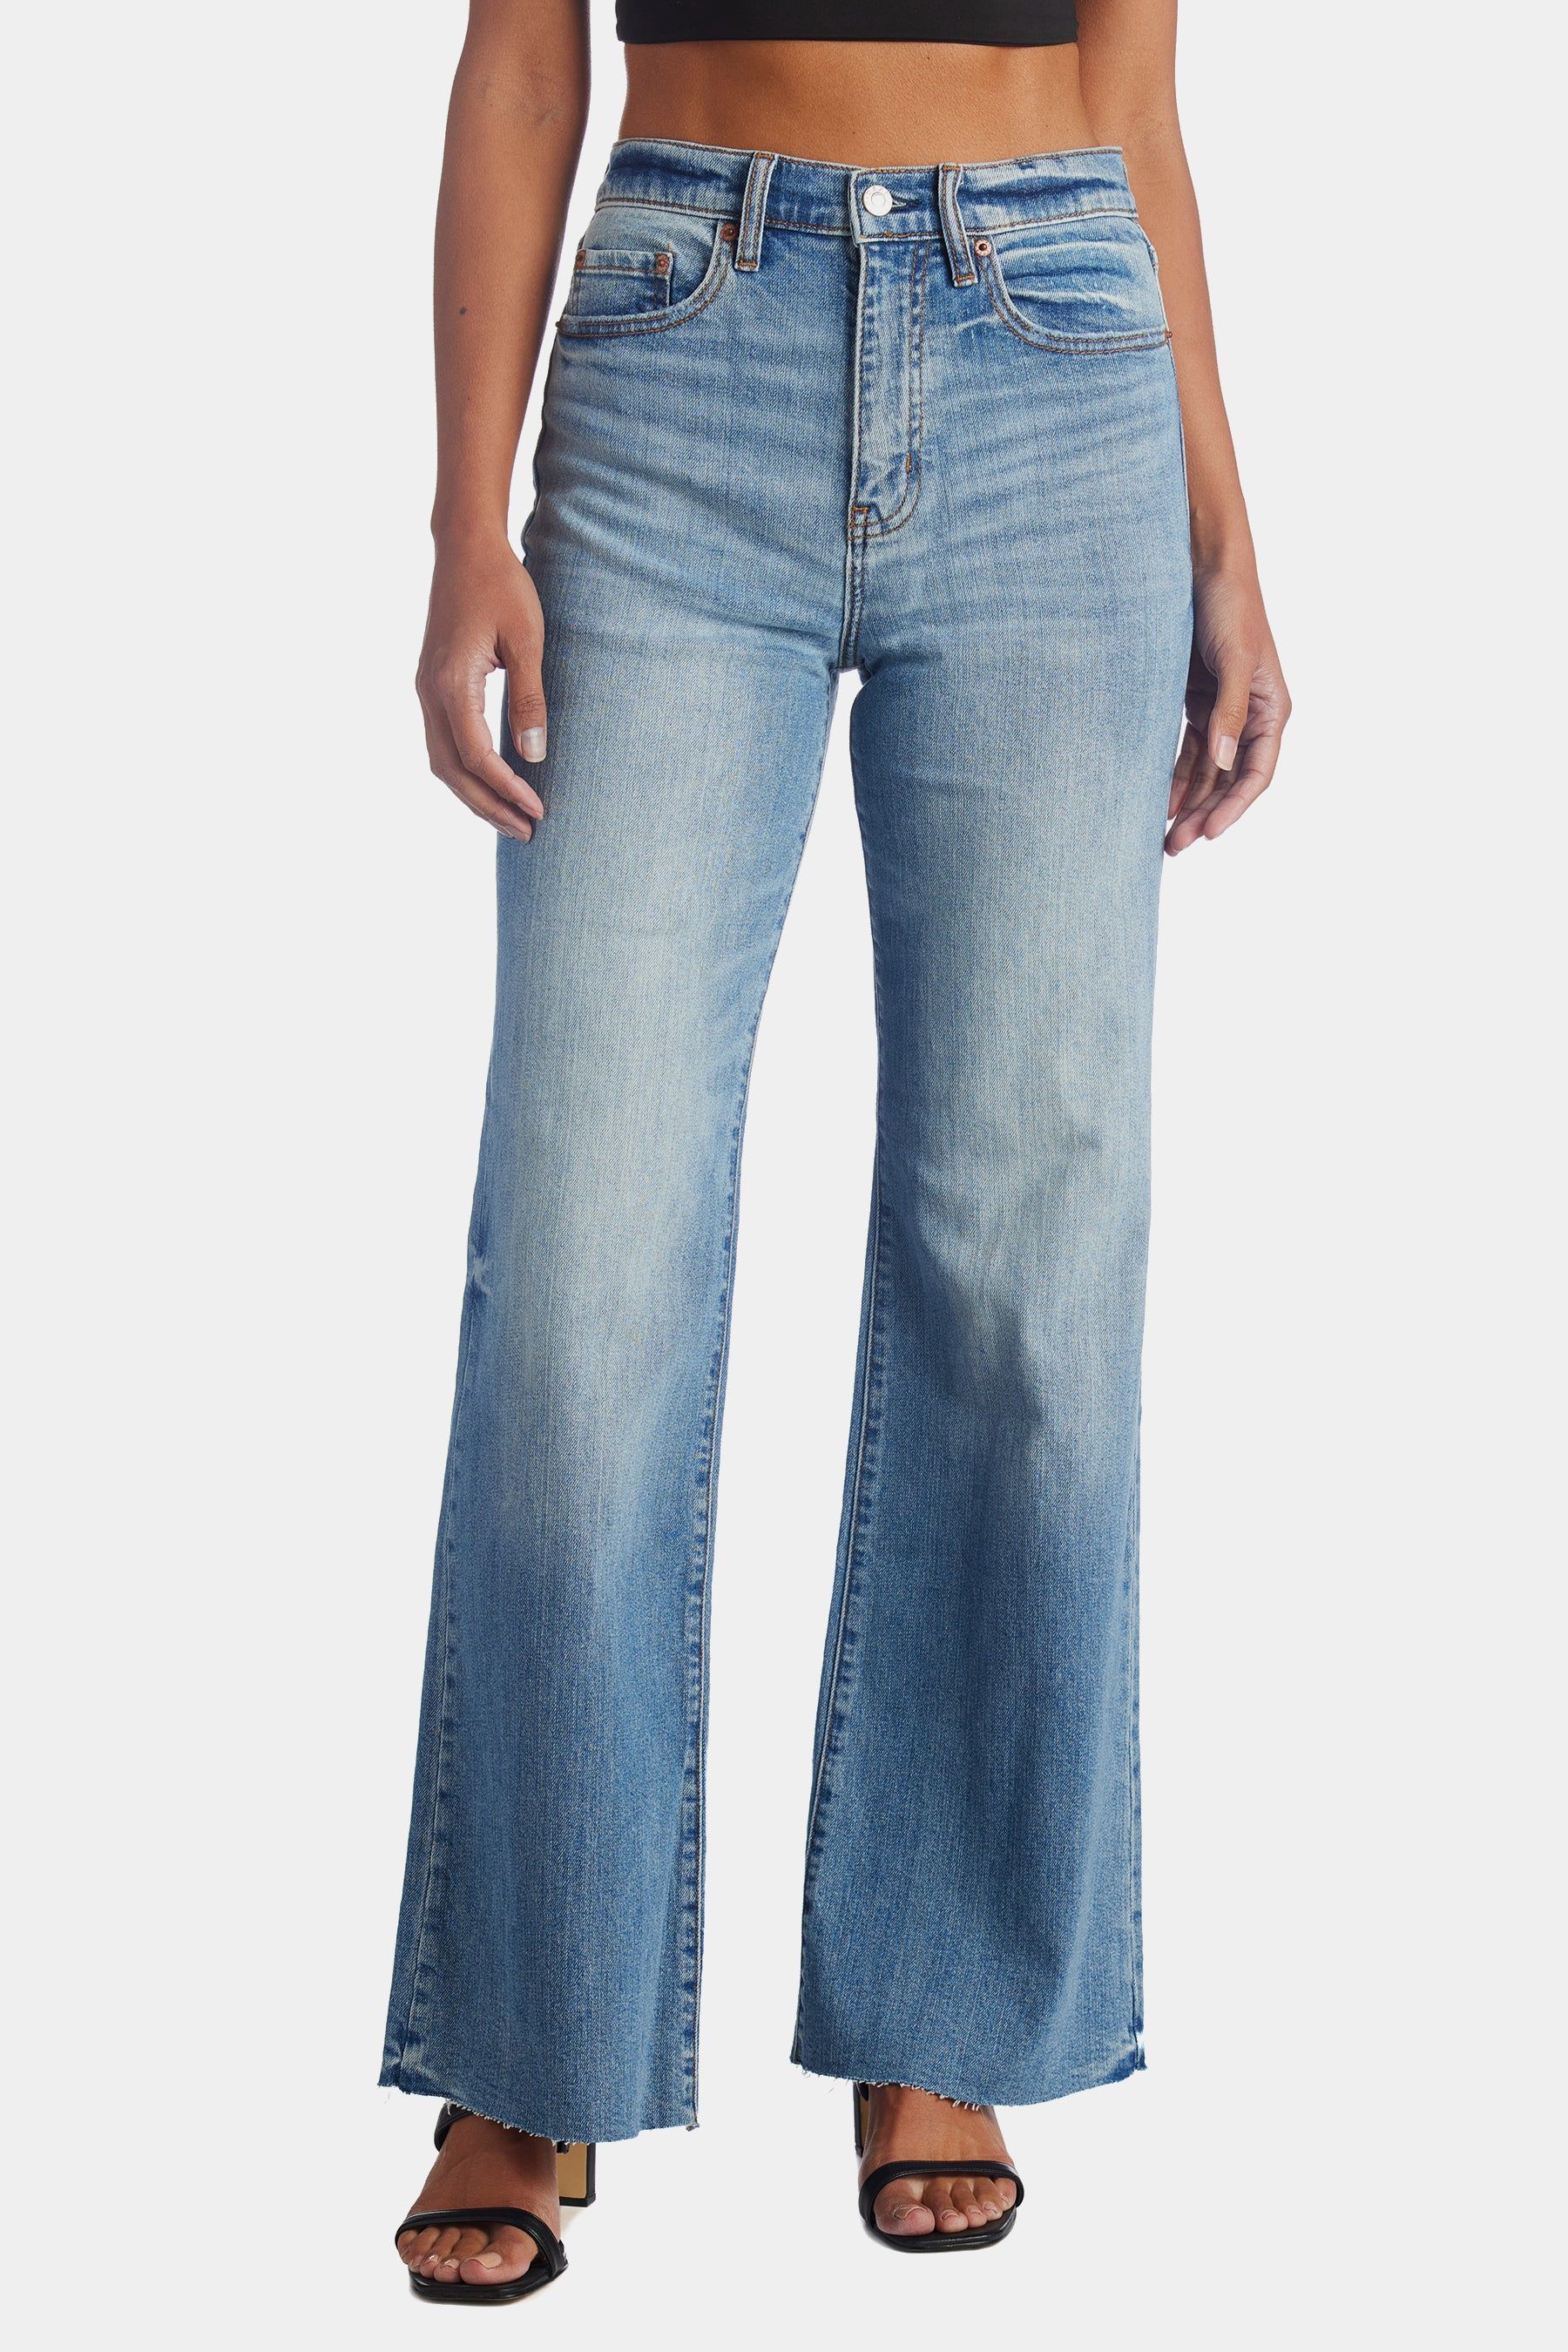 Daze Women's Far Out High Rise Wide Leg Jeans in Fools Gold 28 Lord & Taylor | Lord & Taylor